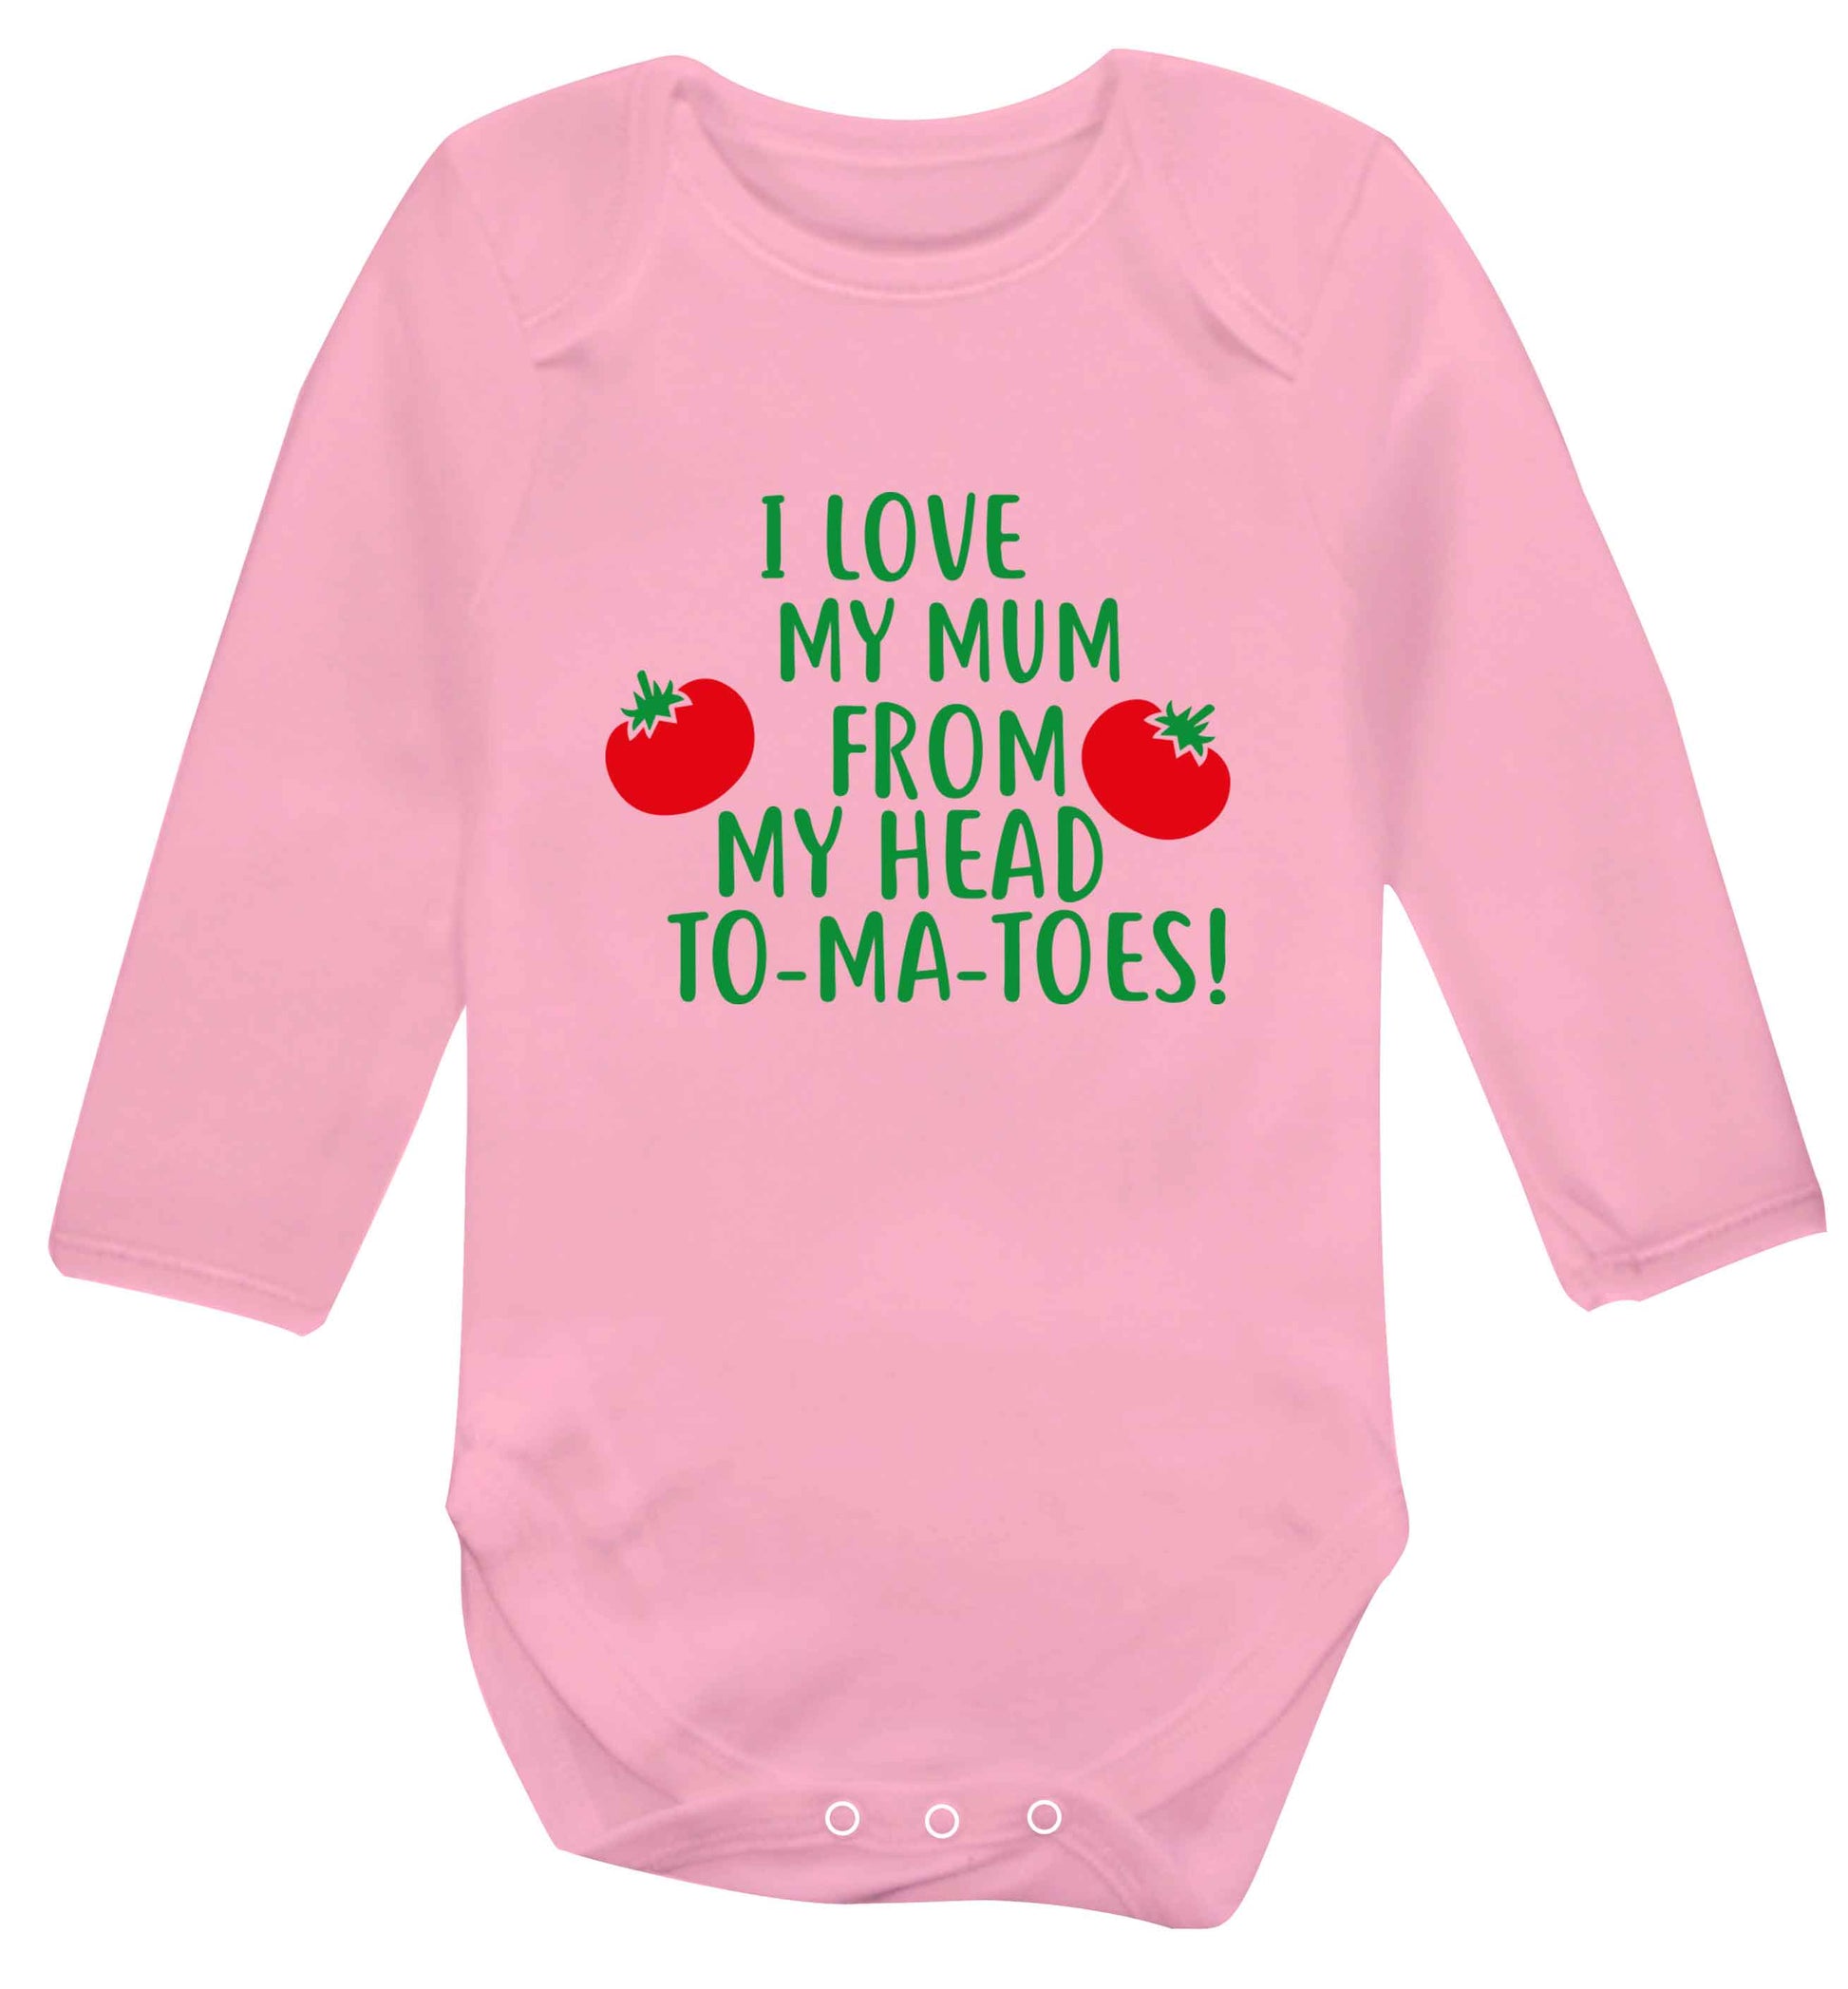 I love my mum from my head to-my-toes! baby vest long sleeved pale pink 6-12 months